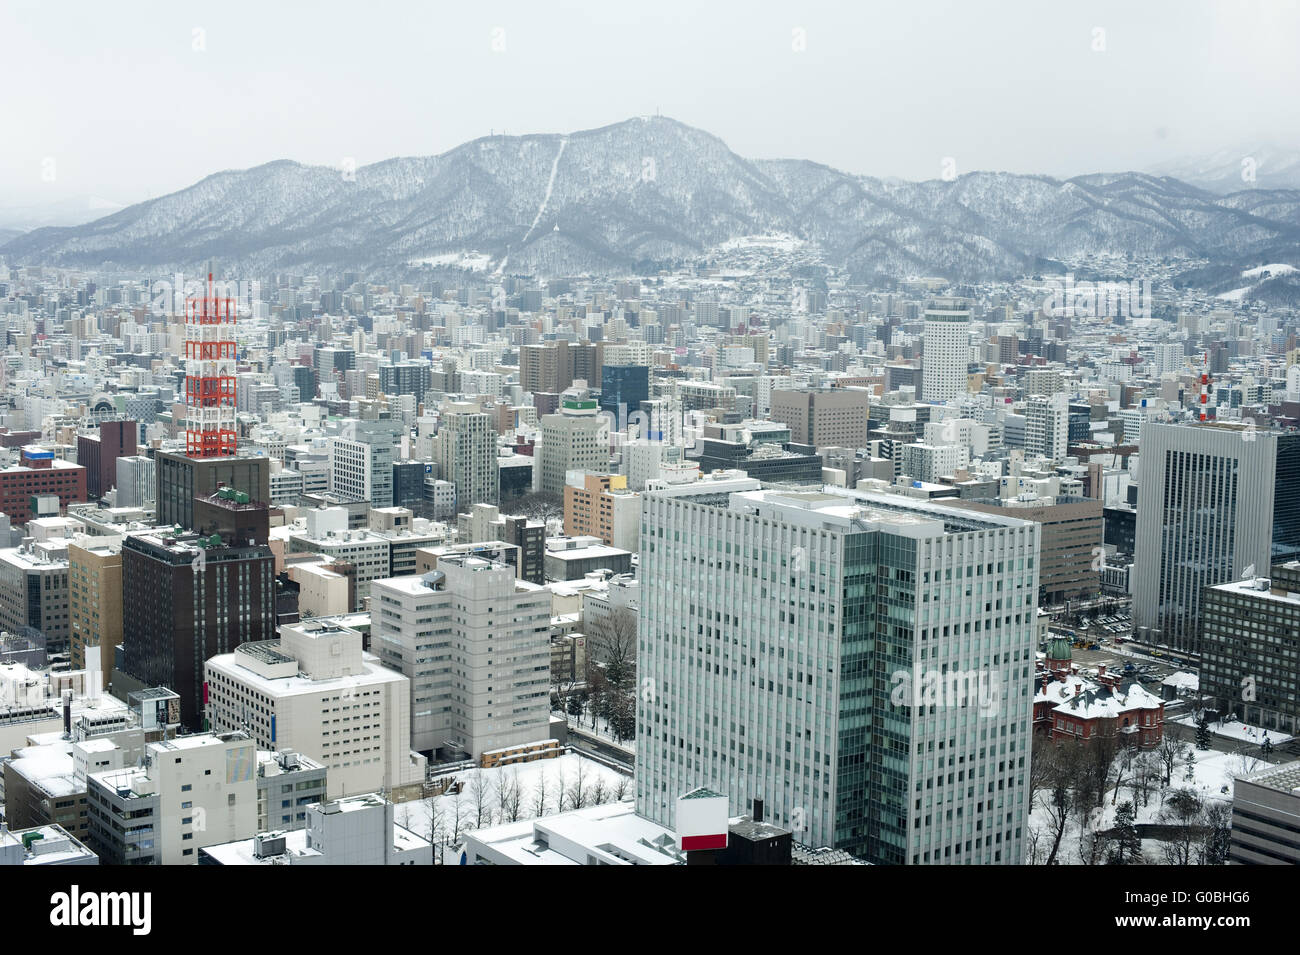 City of Sapporo as viewed from the JR Tower Stock Photo